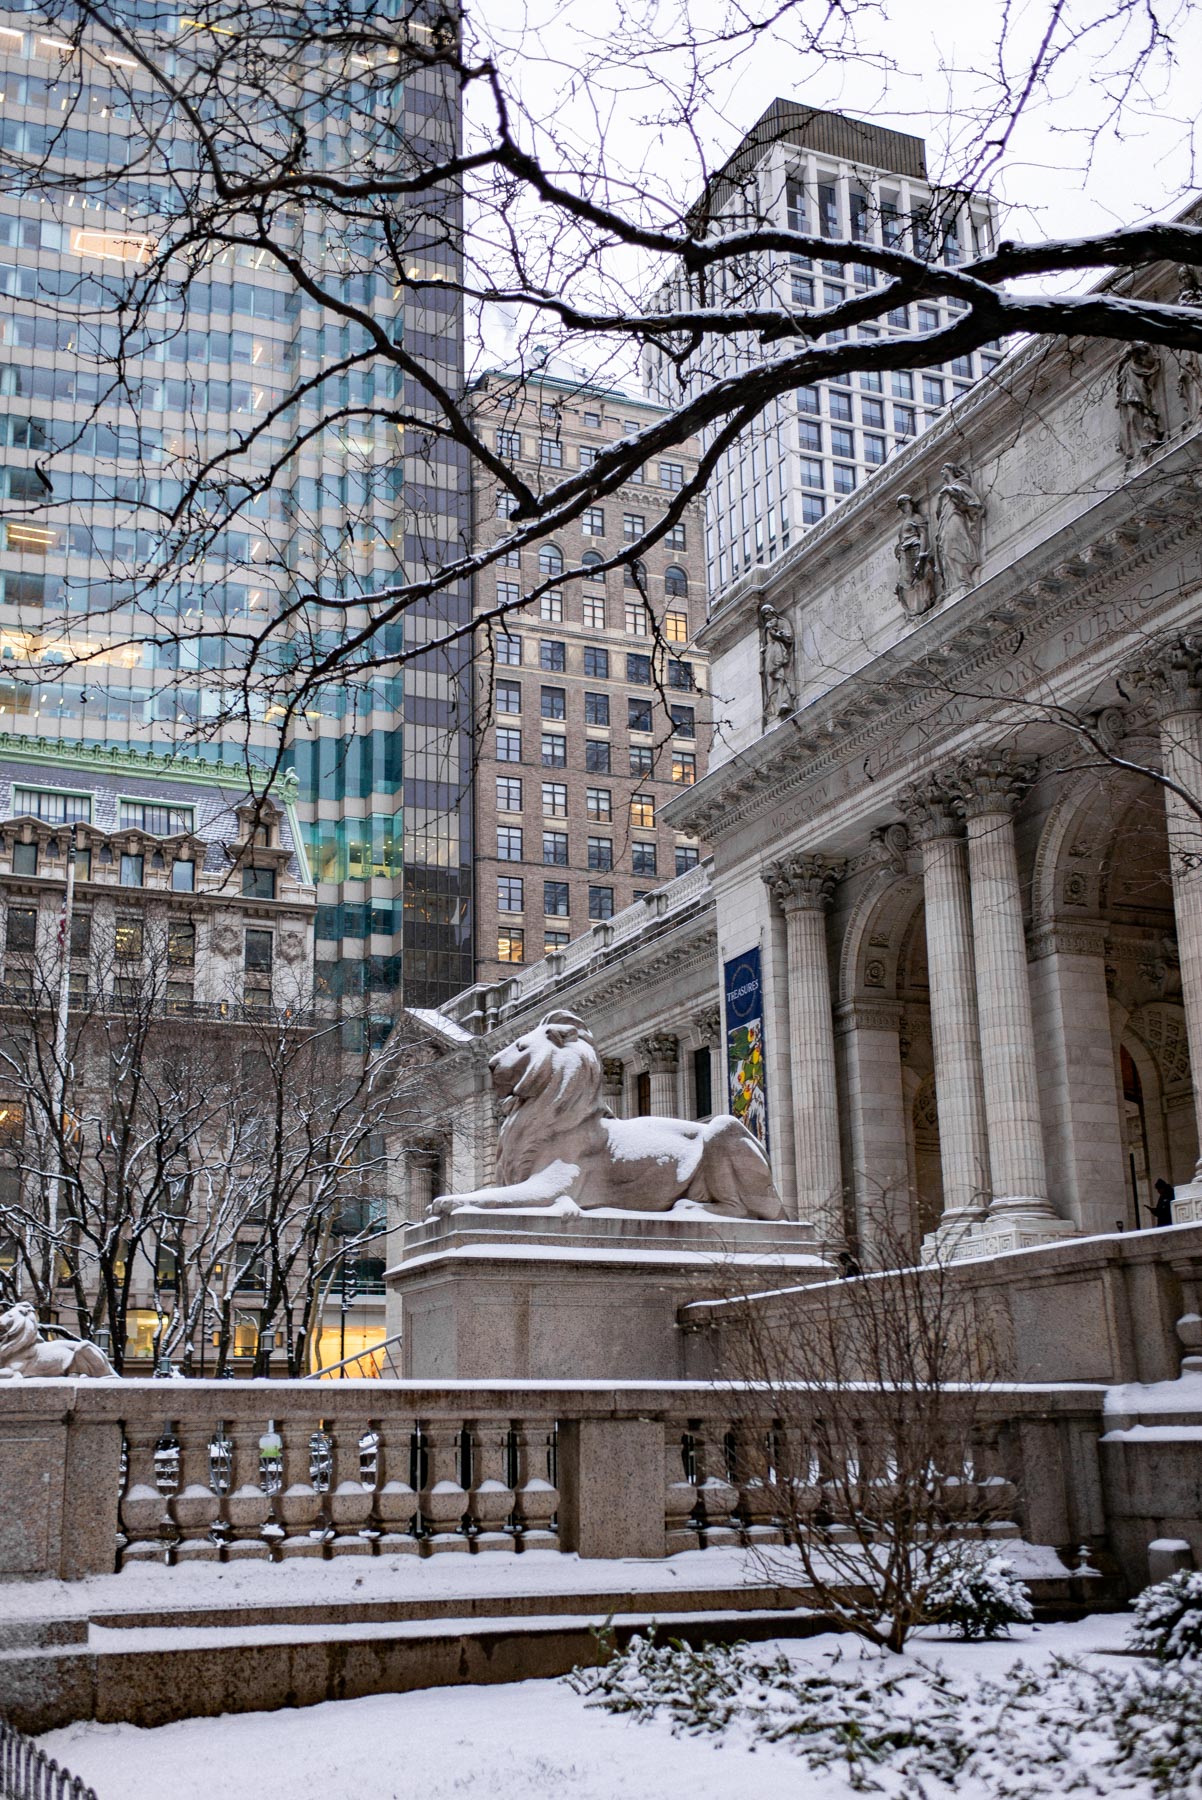 The New York Public Library in the snow
best free museums in New York City